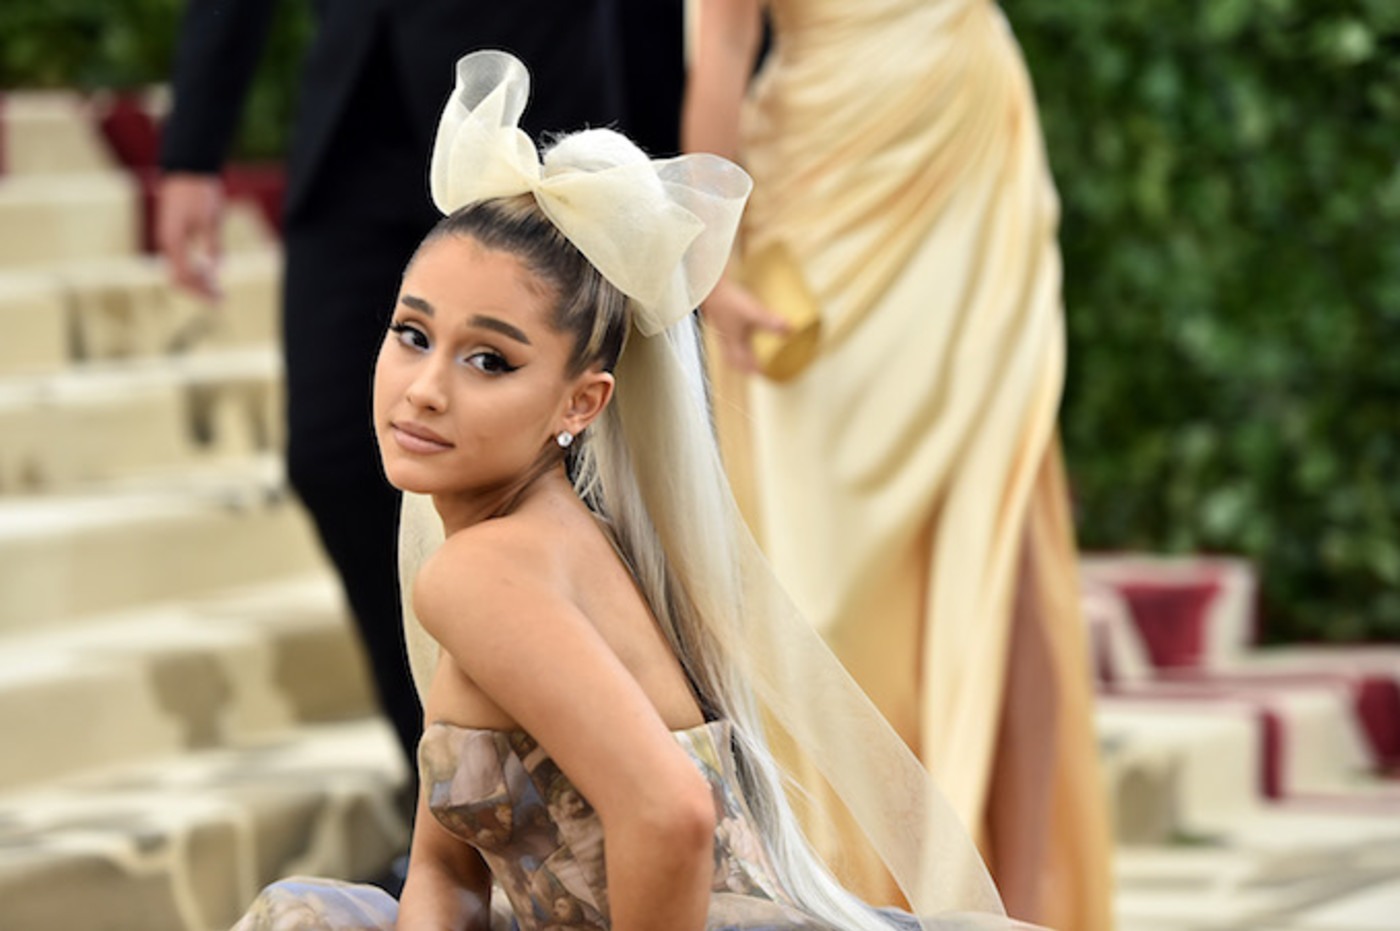 Sexy Ariana Grande Leaked - Ariana Grande Helps Friend Shoot Shot at ASAP Rocky After Alleged Sex Tape  | Complex